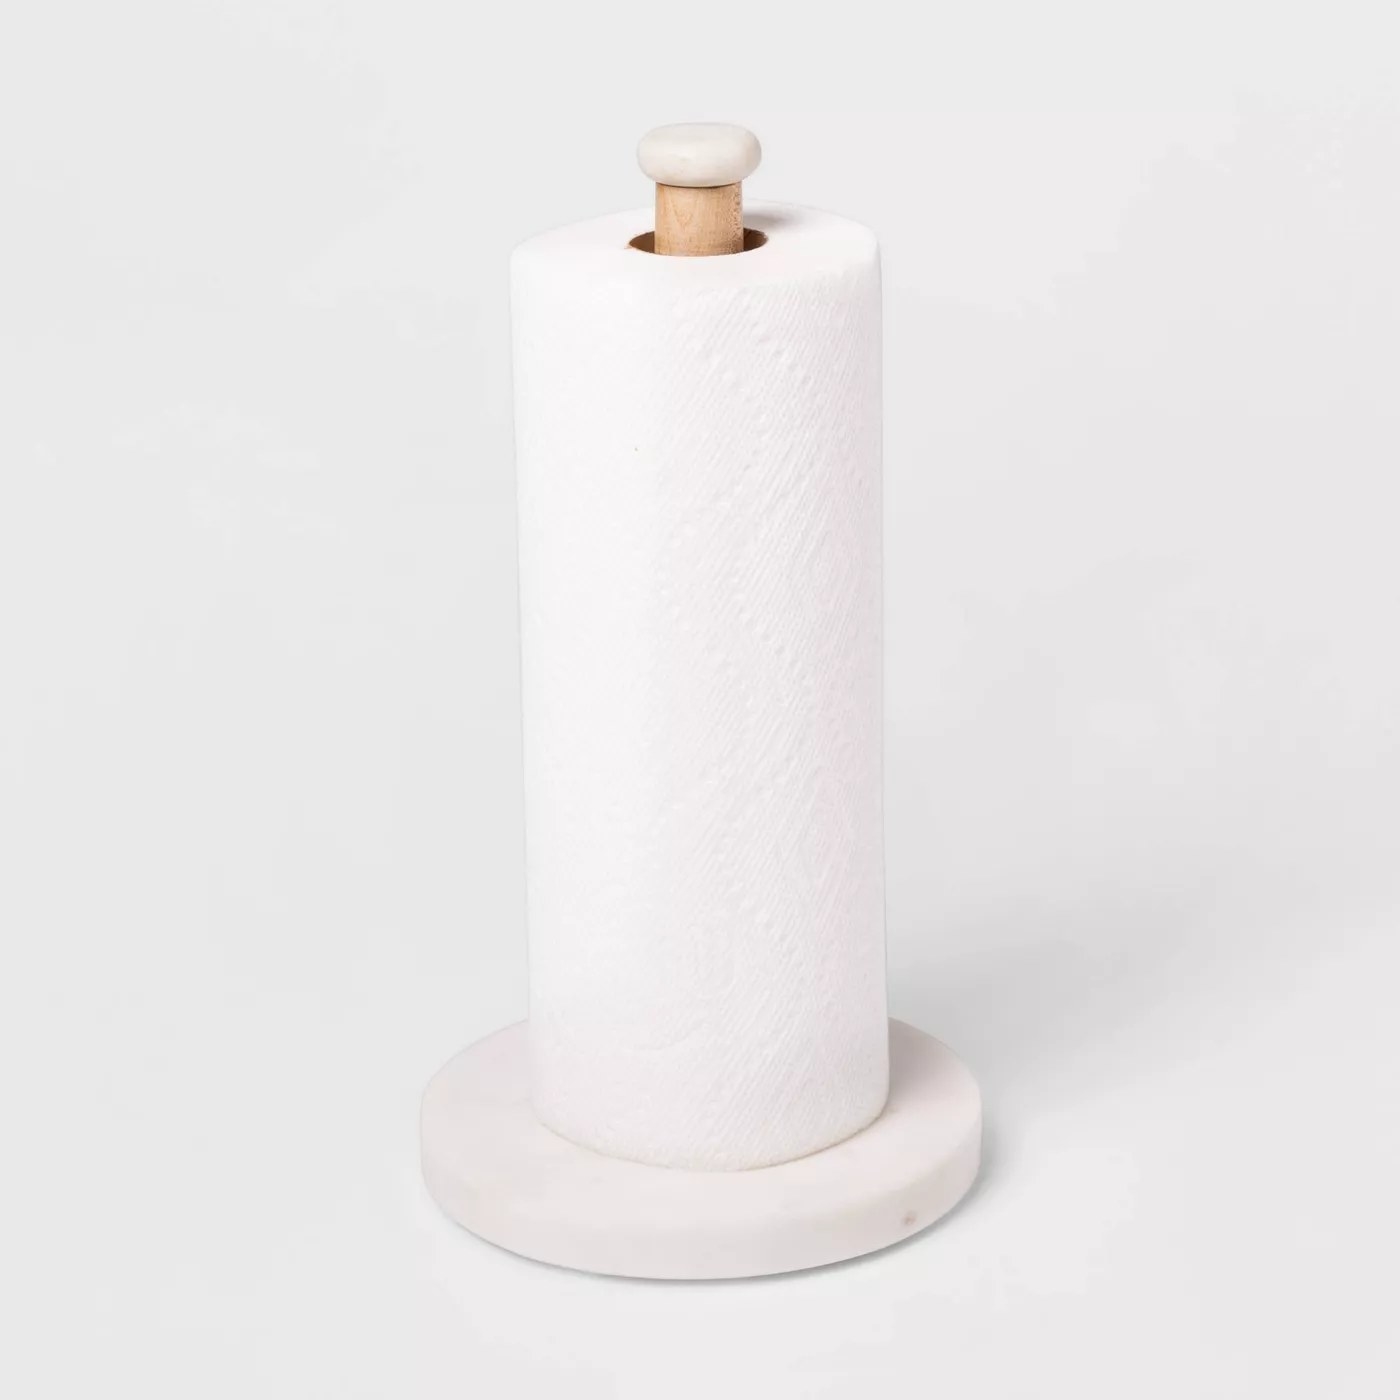 The holder holding a roll of paper towel